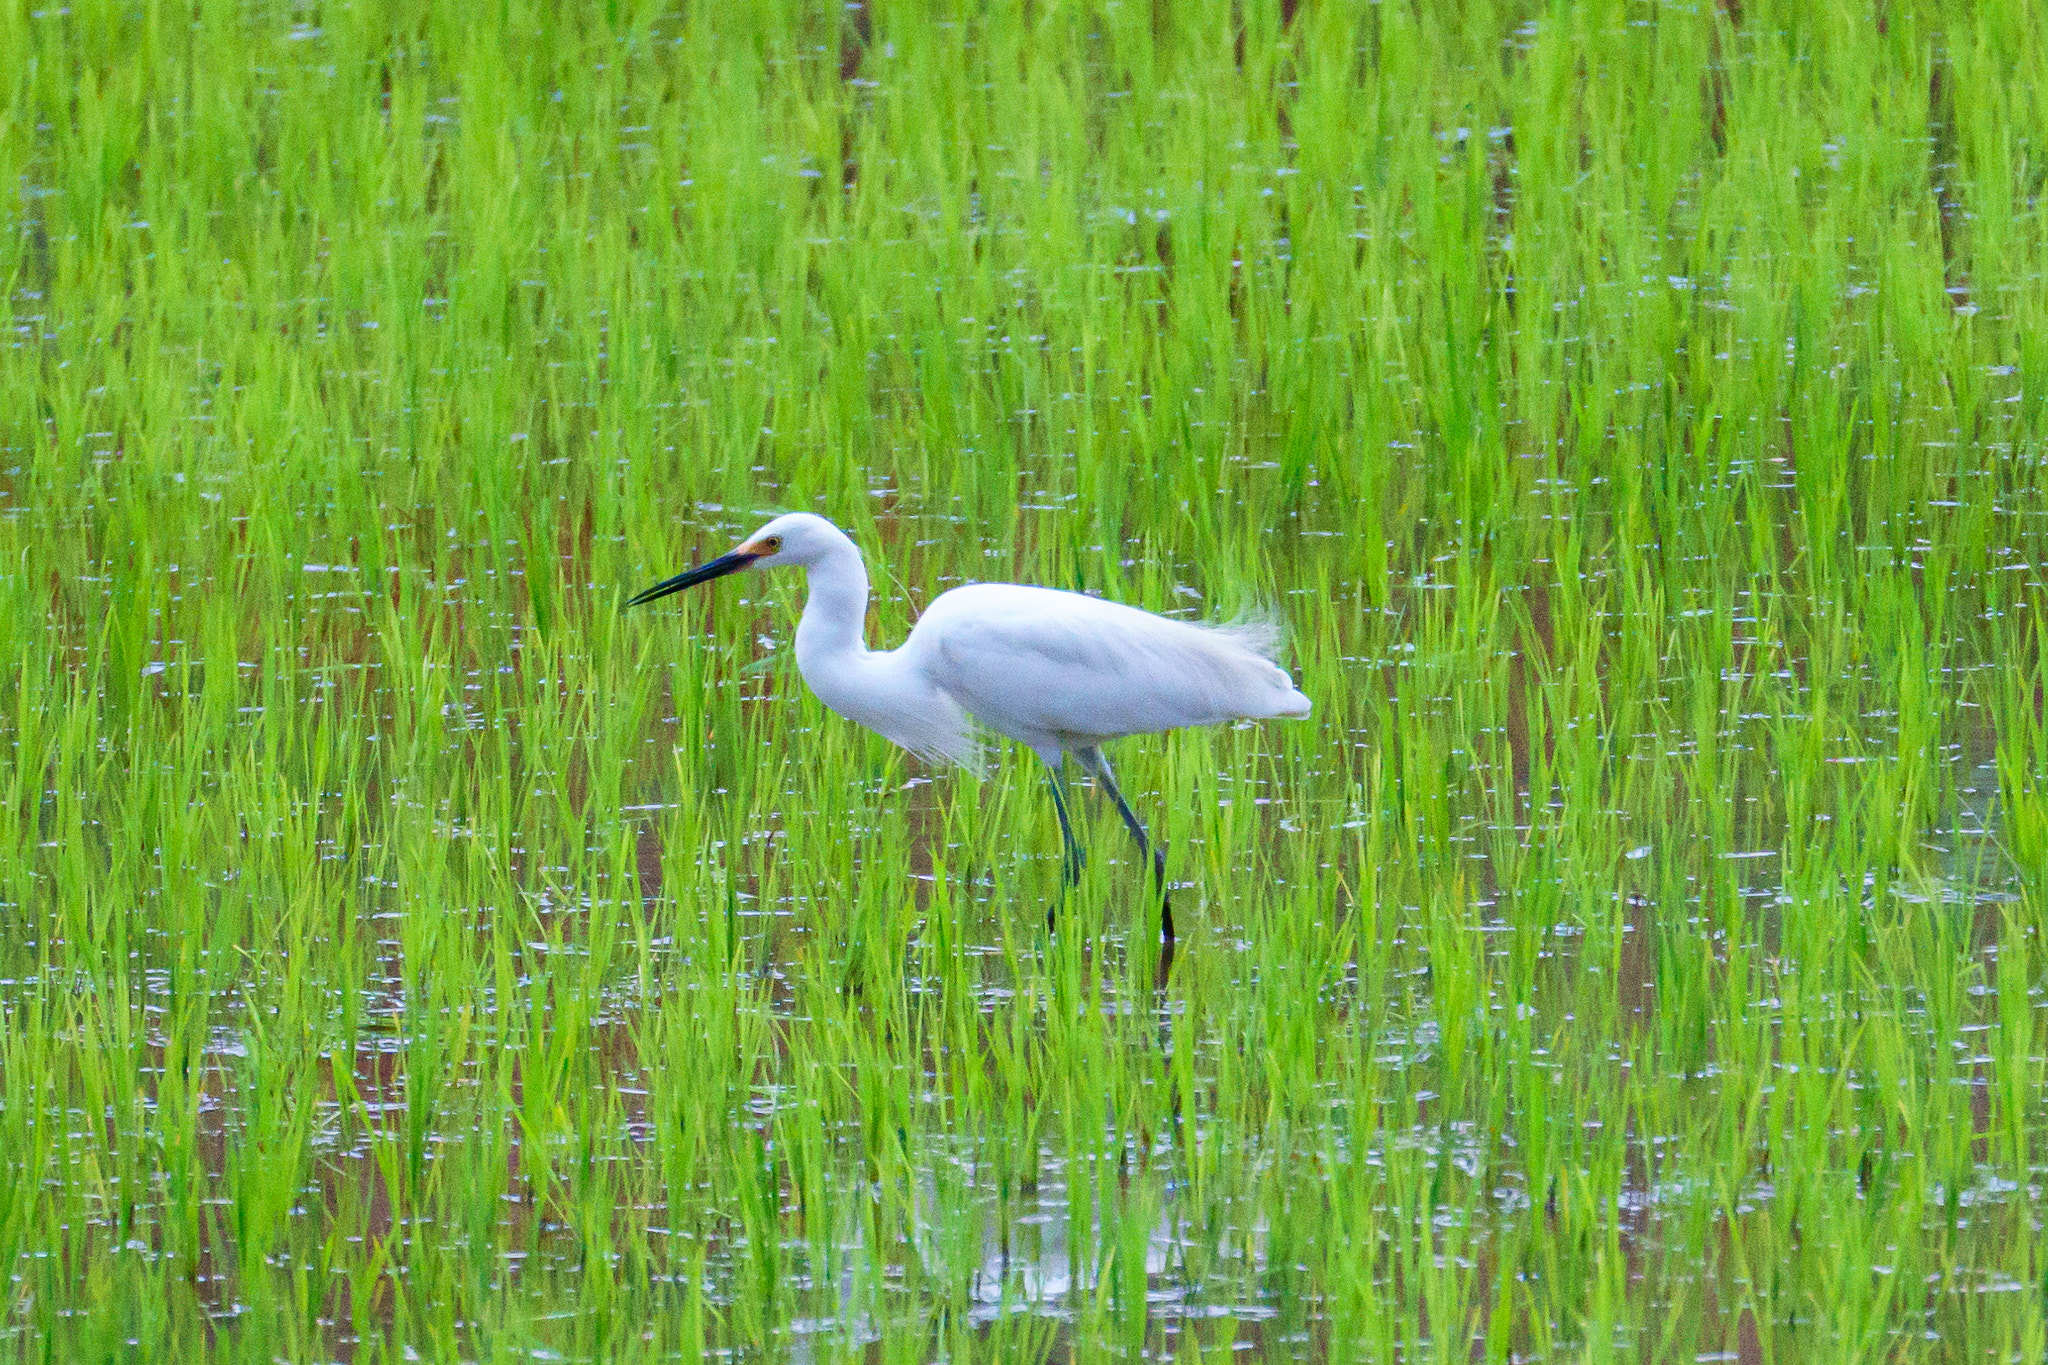 Sony a6300 sample photo. White crane in madagascar rice field photography